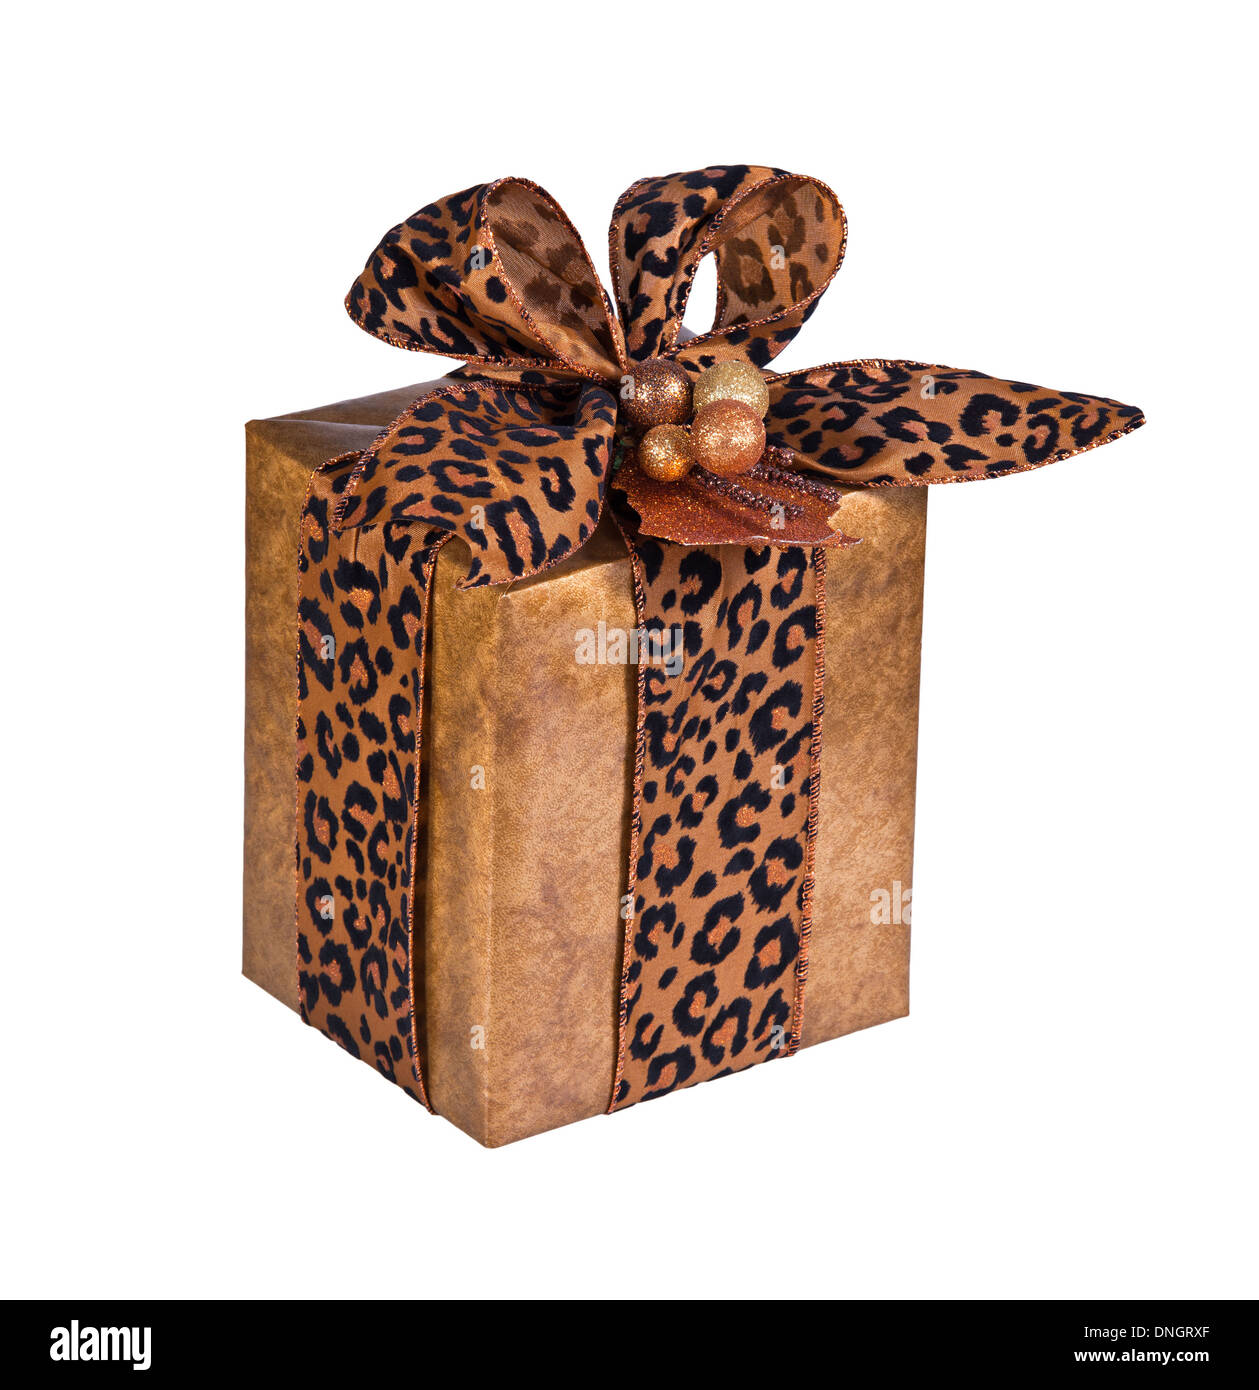 Festive present wrapped in faux leather gift paper with animal print ribbon isolated over white Stock Photo